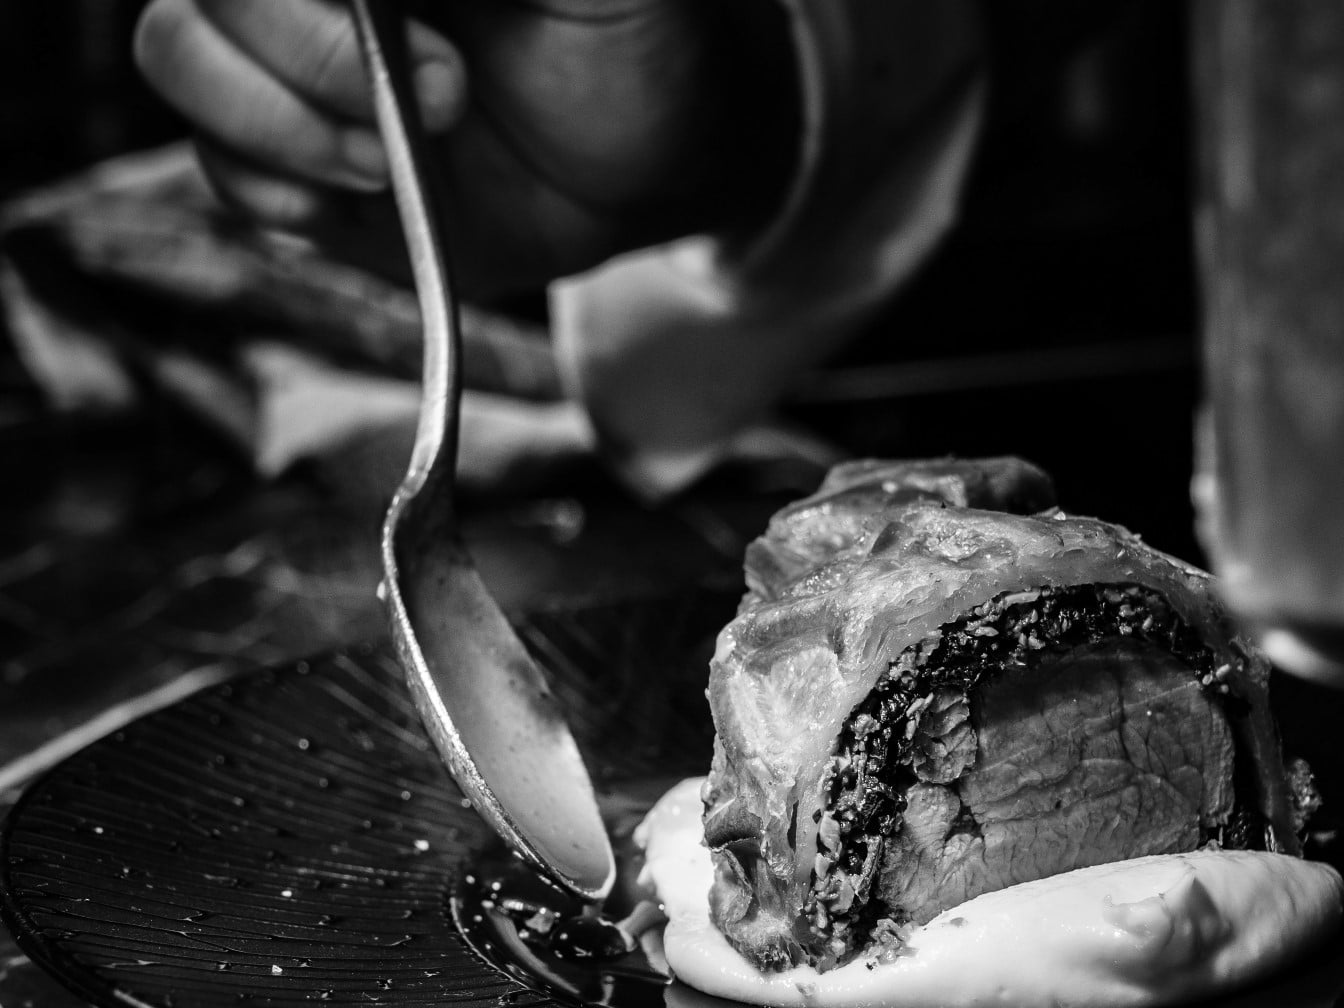 Chef adding finishing touches to a slice of beef wellington on mashed potatoes